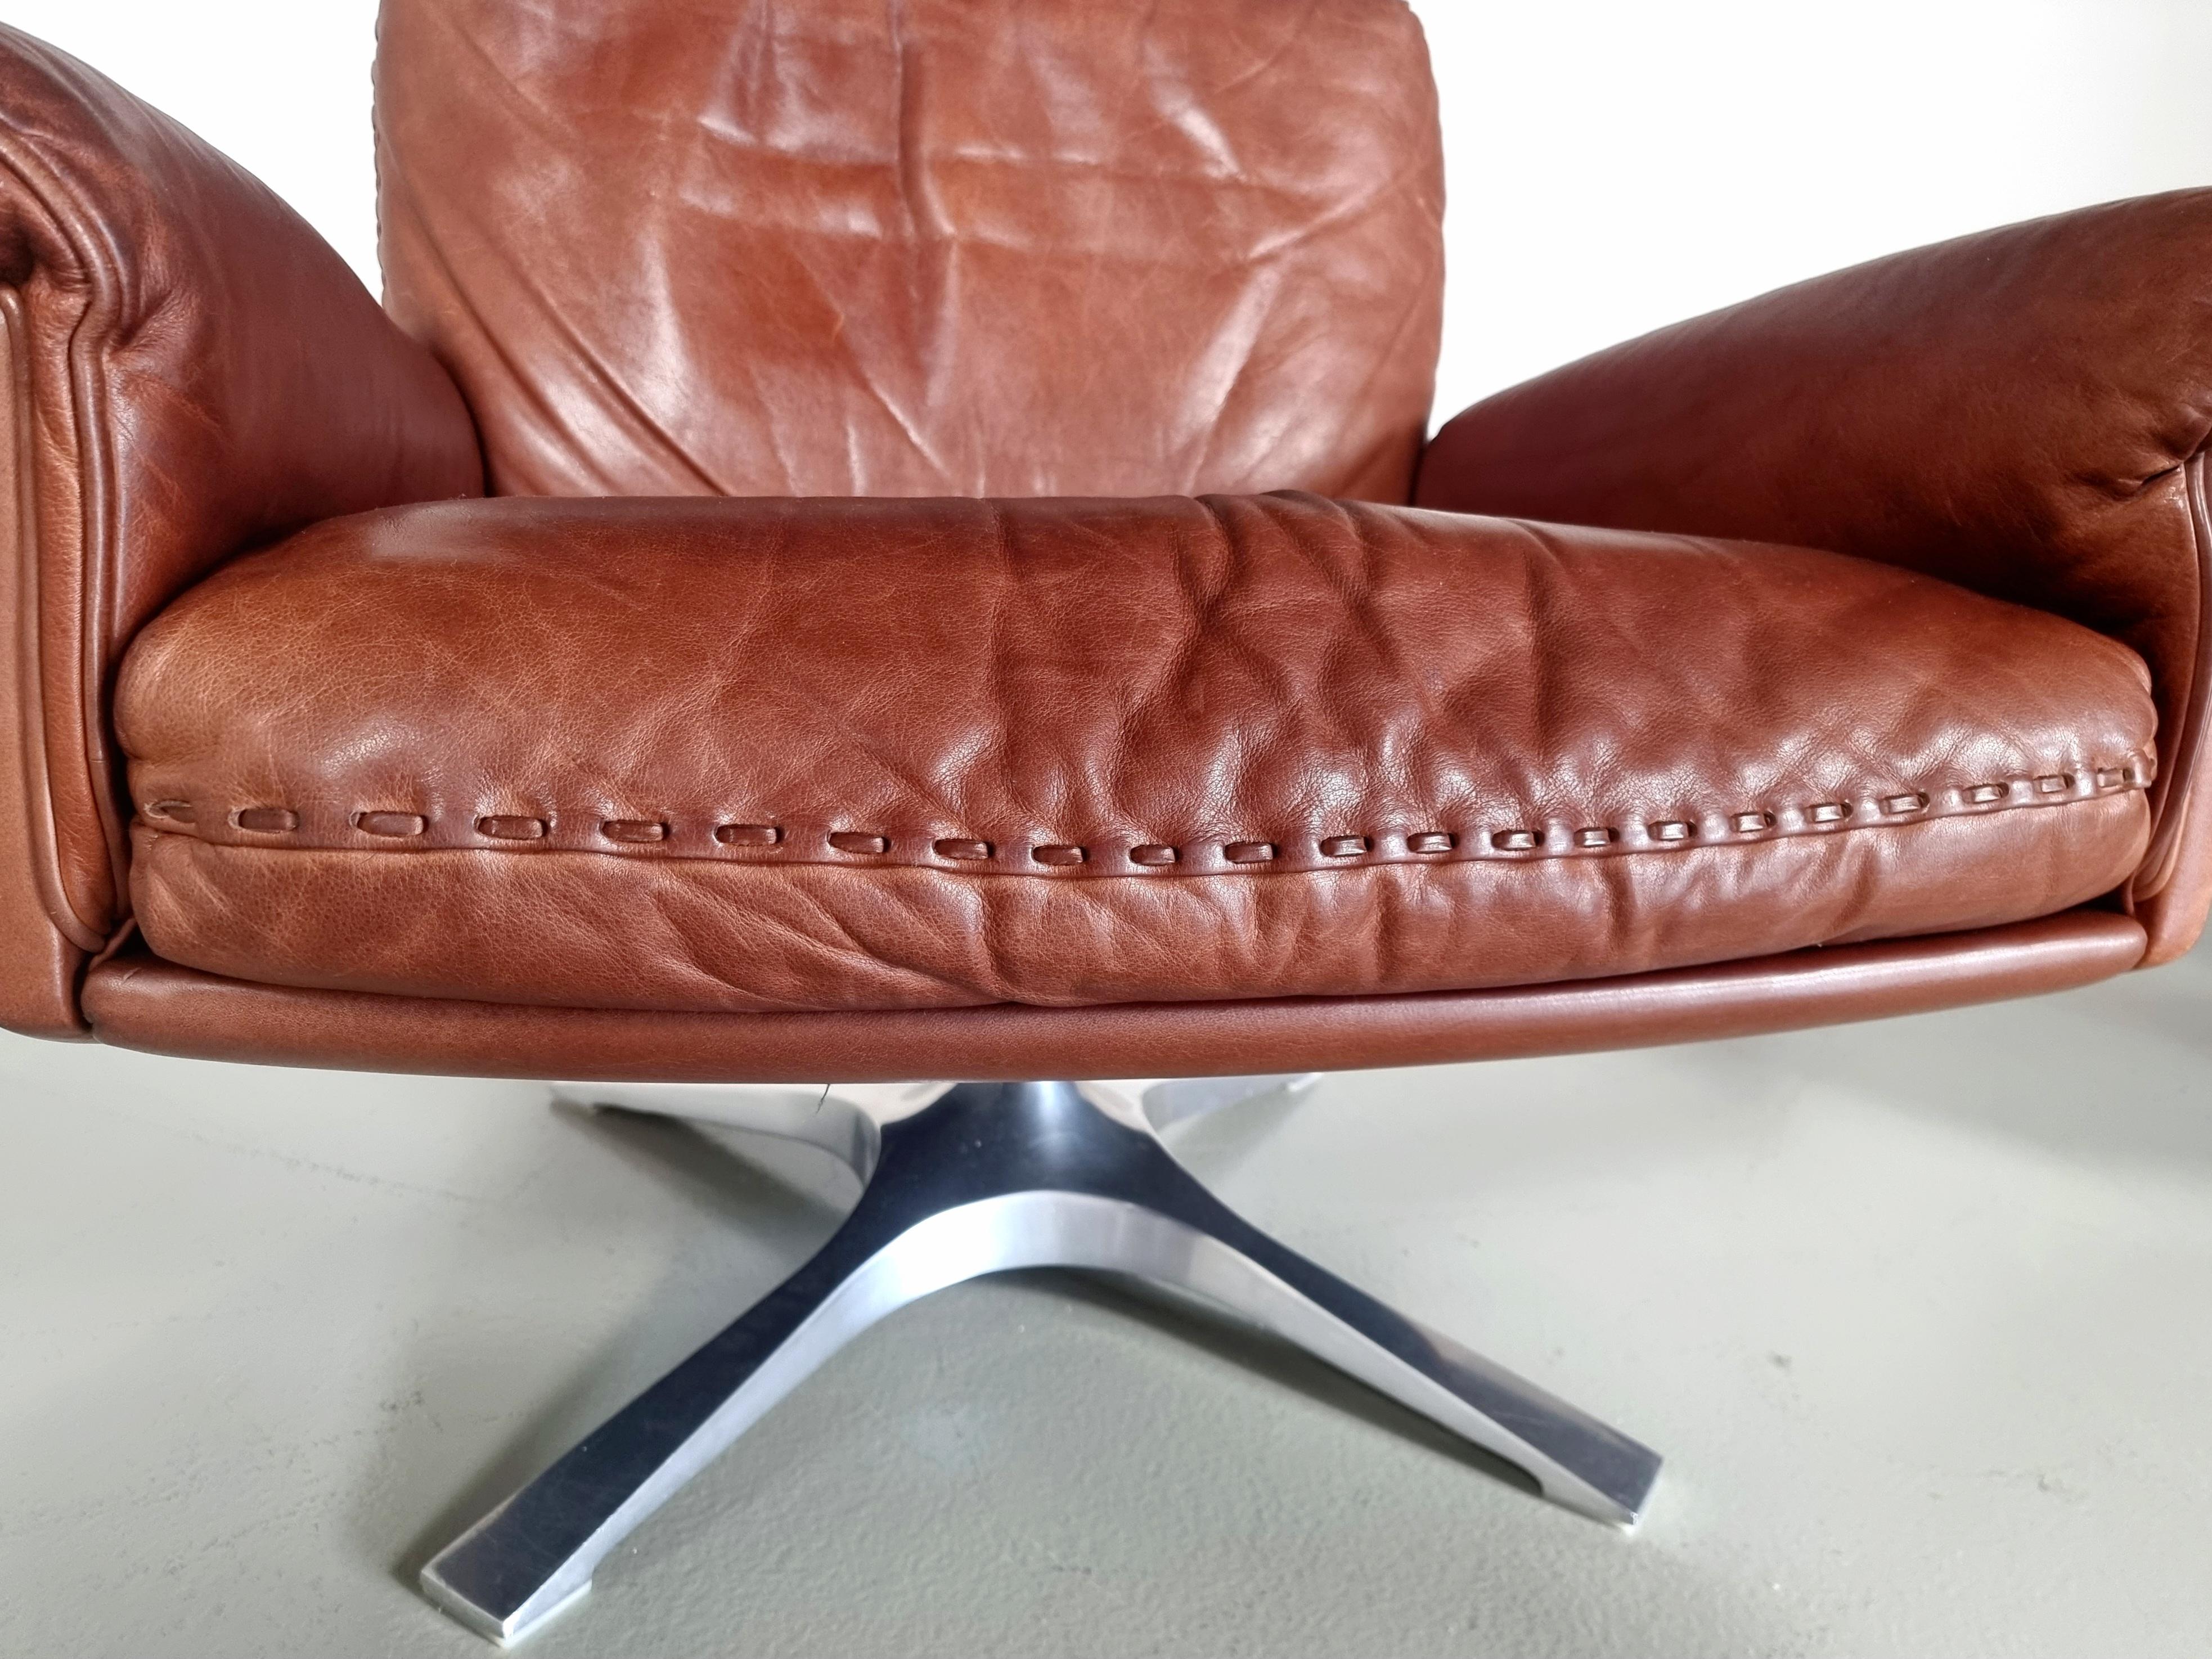 Set of 2 De Sede Ds-31 Swivel Lounge Chairs in Light Brown Leather, 1970s For Sale 4